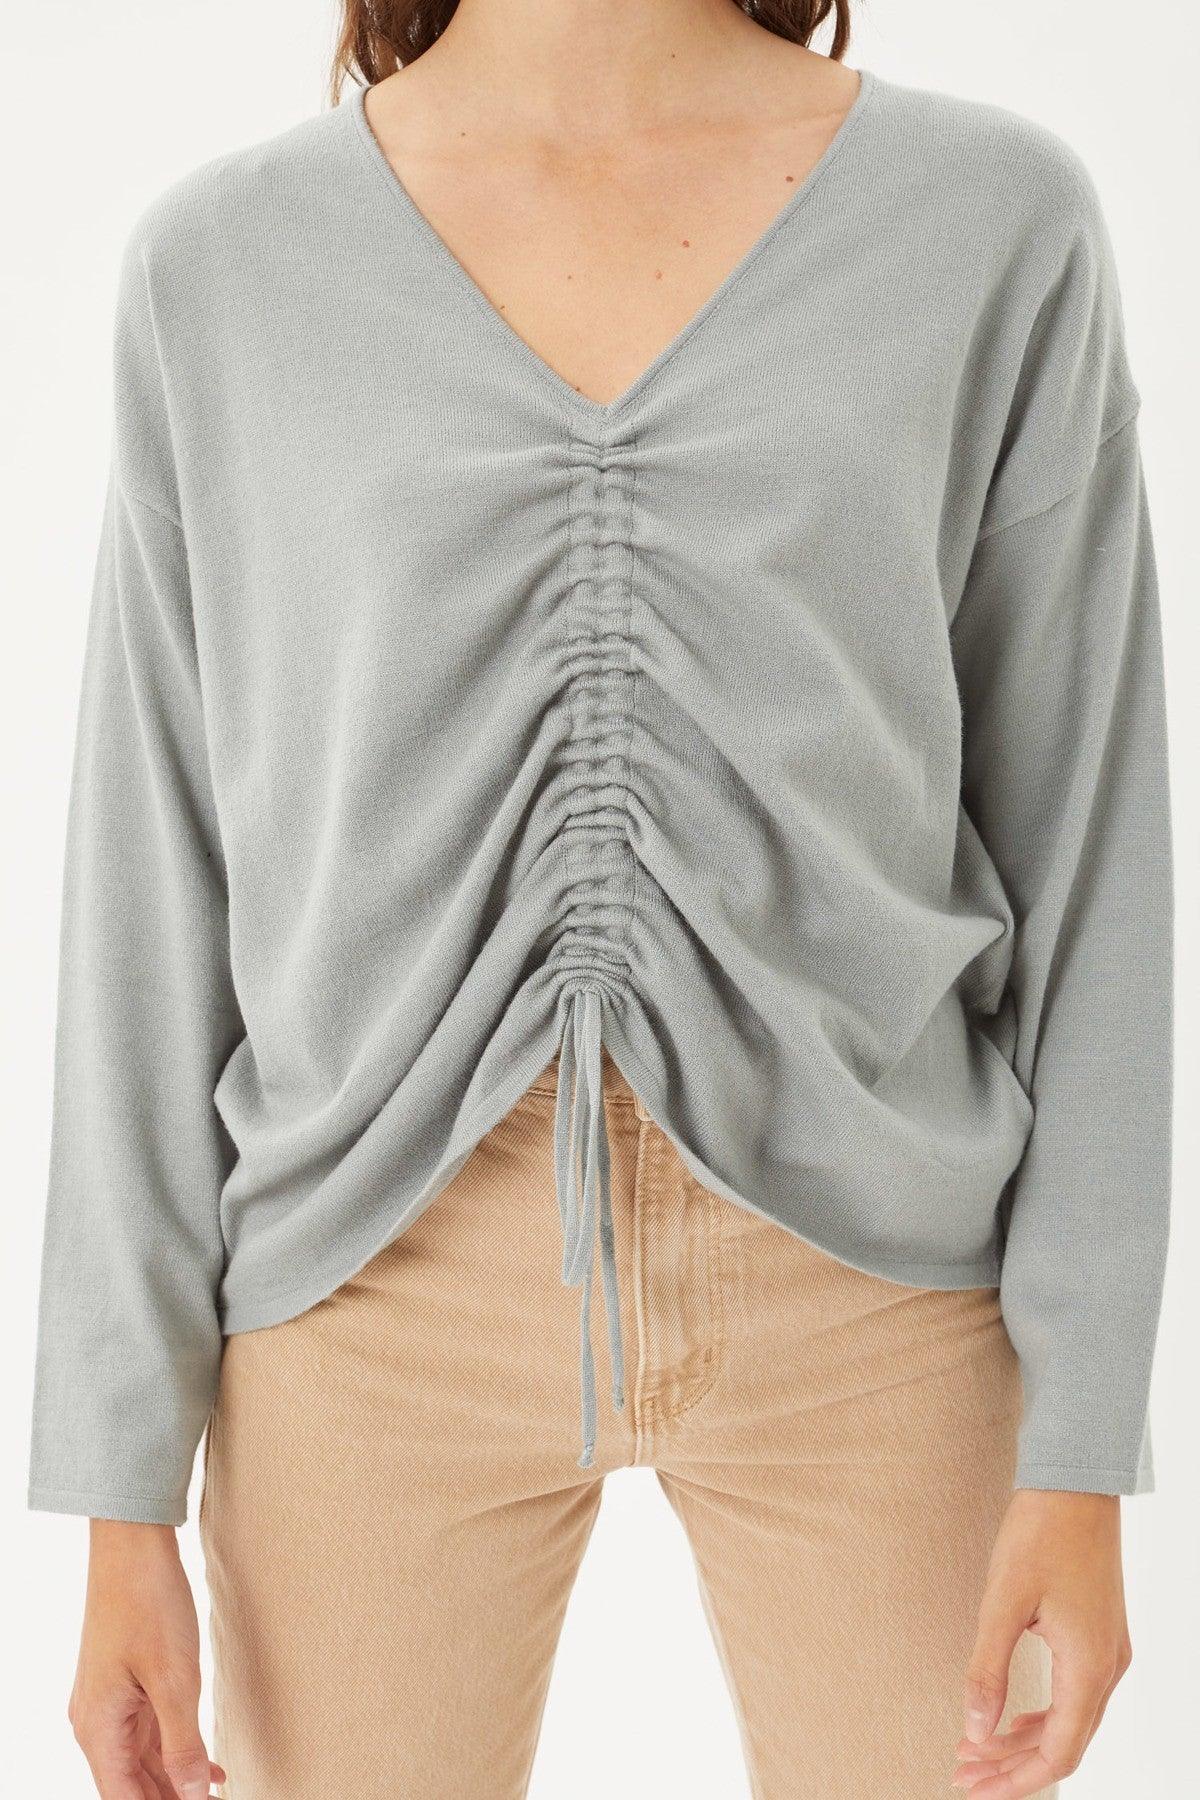 A V-neckline Drawstring Ruched Top Naughty Smile Fashion